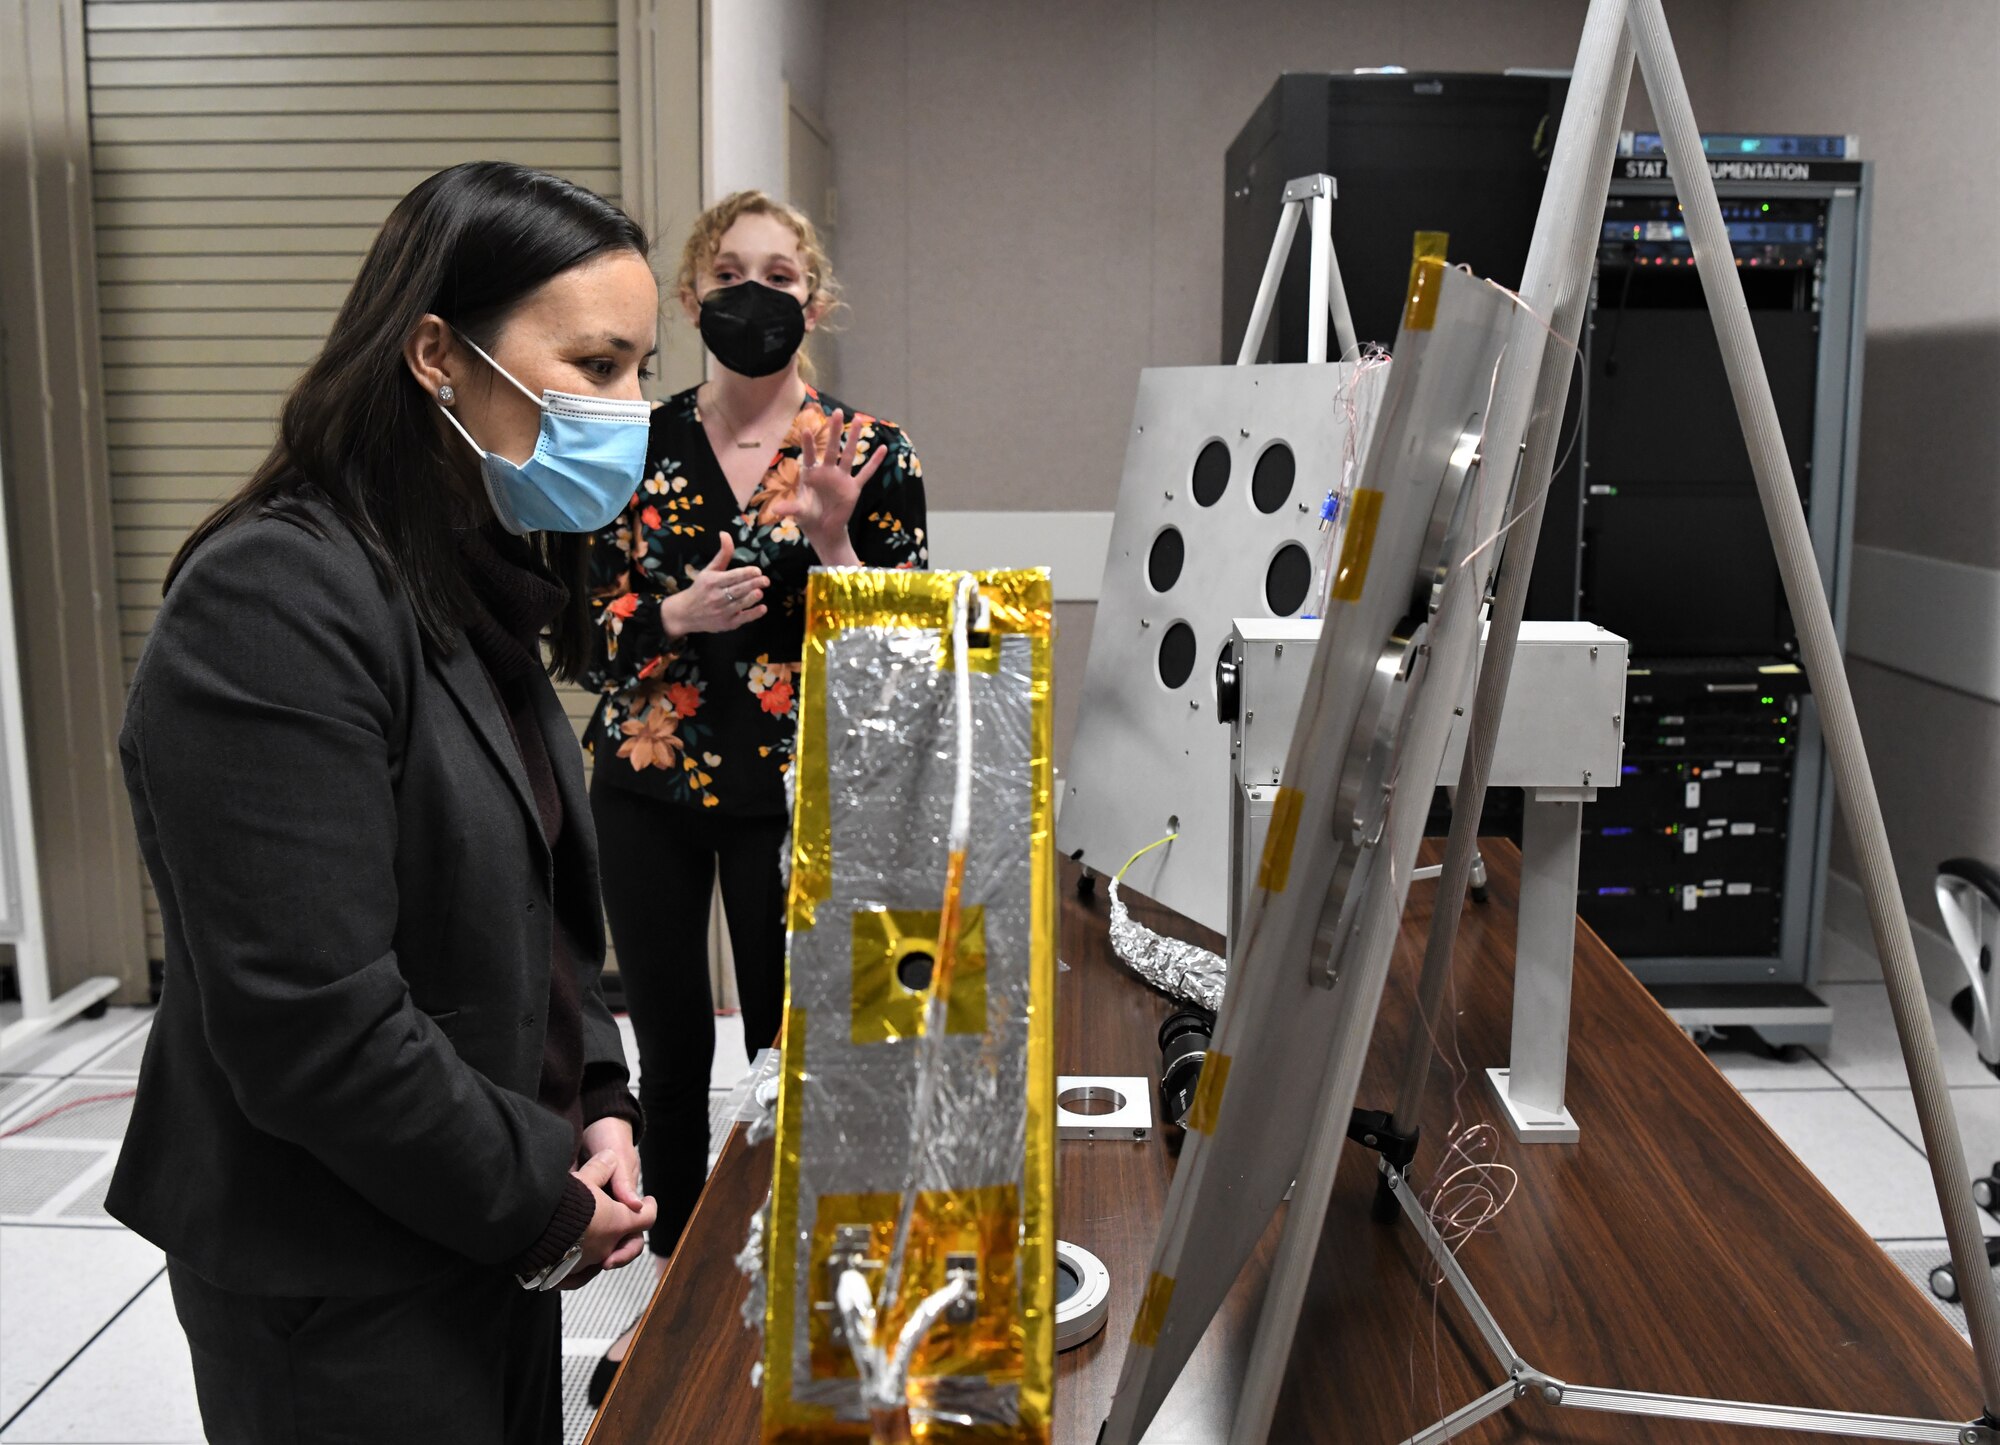 Under Secretary of the Air Force Gina Ortiz Jones, looks at test samples as Savannah Langer, an engineer with the Space Test Branch, Test Division, Arnold Engineering Development Complex (AEDC), speaks about the Space Threat Assessment Testbed (STAT) in which they were tested at Arnold Air Force Base, Tenn., headquarters of AEDC, Nov. 5, 2021. STAT is used to subject test articles to environmental factors in a simulated space environment. (U.S. Air Force photo by Jill Pickett)